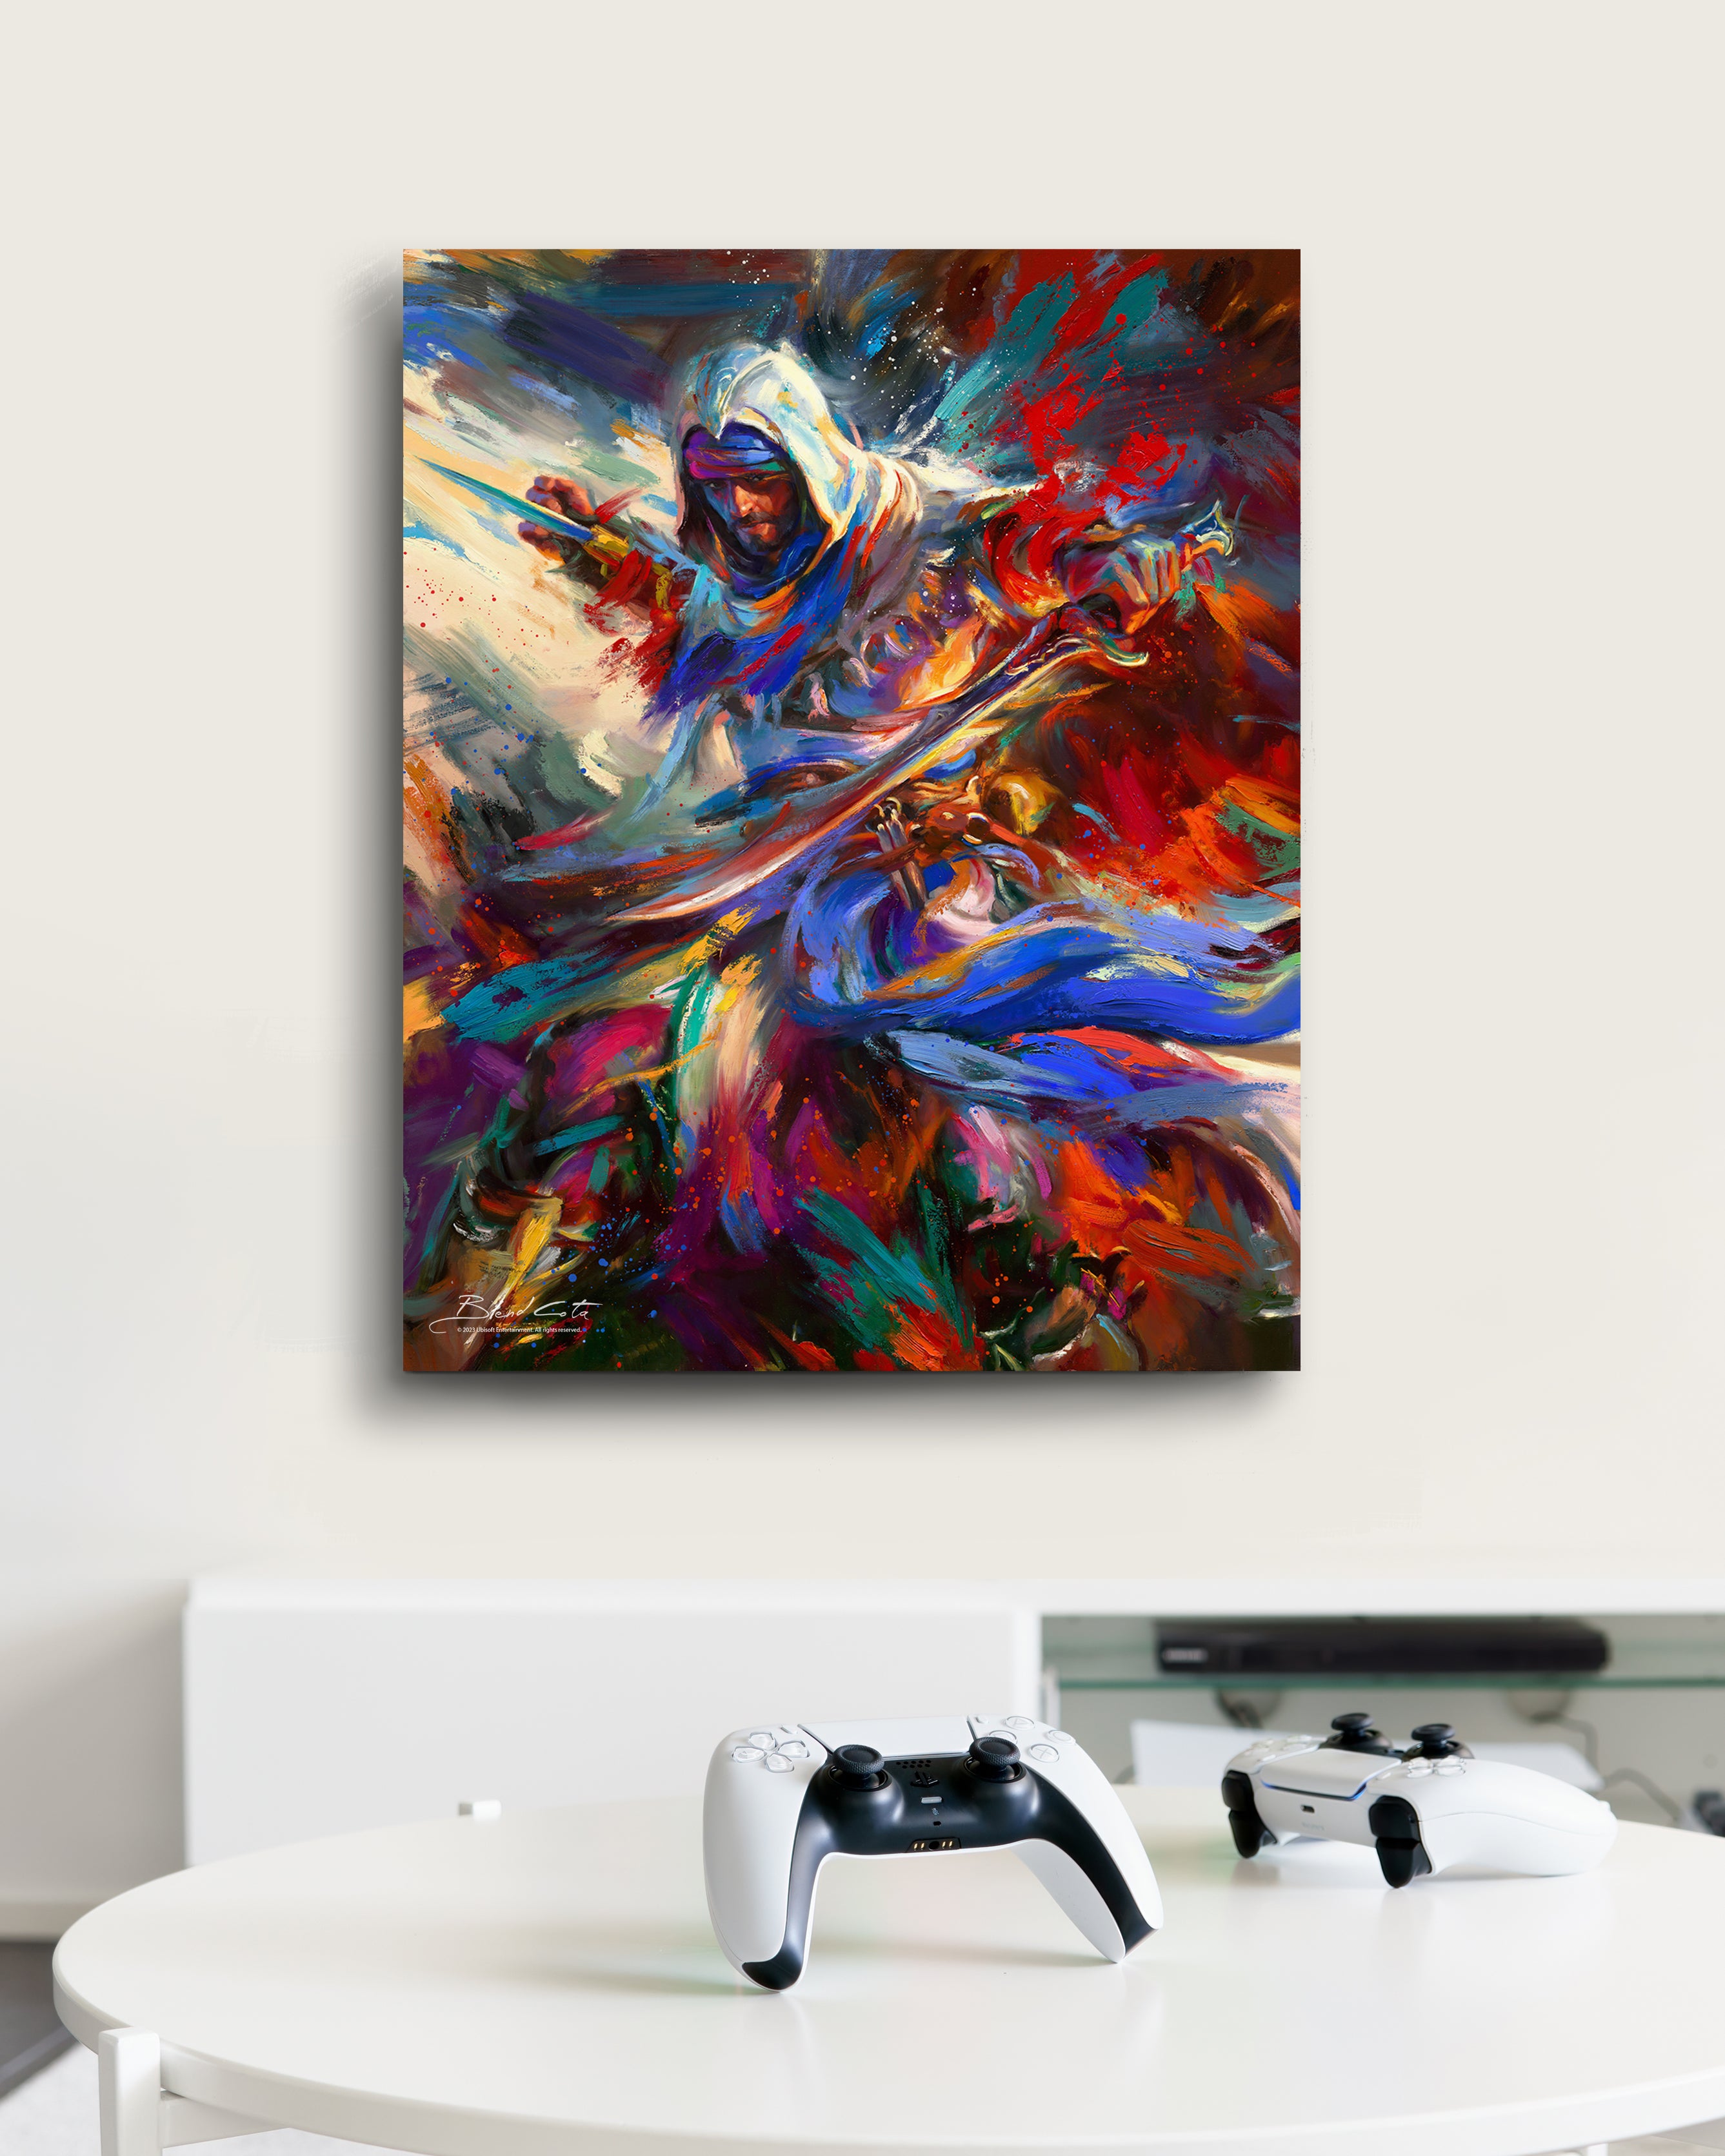 Limited Edition glossy metal print of Assassin's Creed Basim of Mirage bursting forth with energy and painted with colorful brushstrokes in an expressionistic style in a room setting.